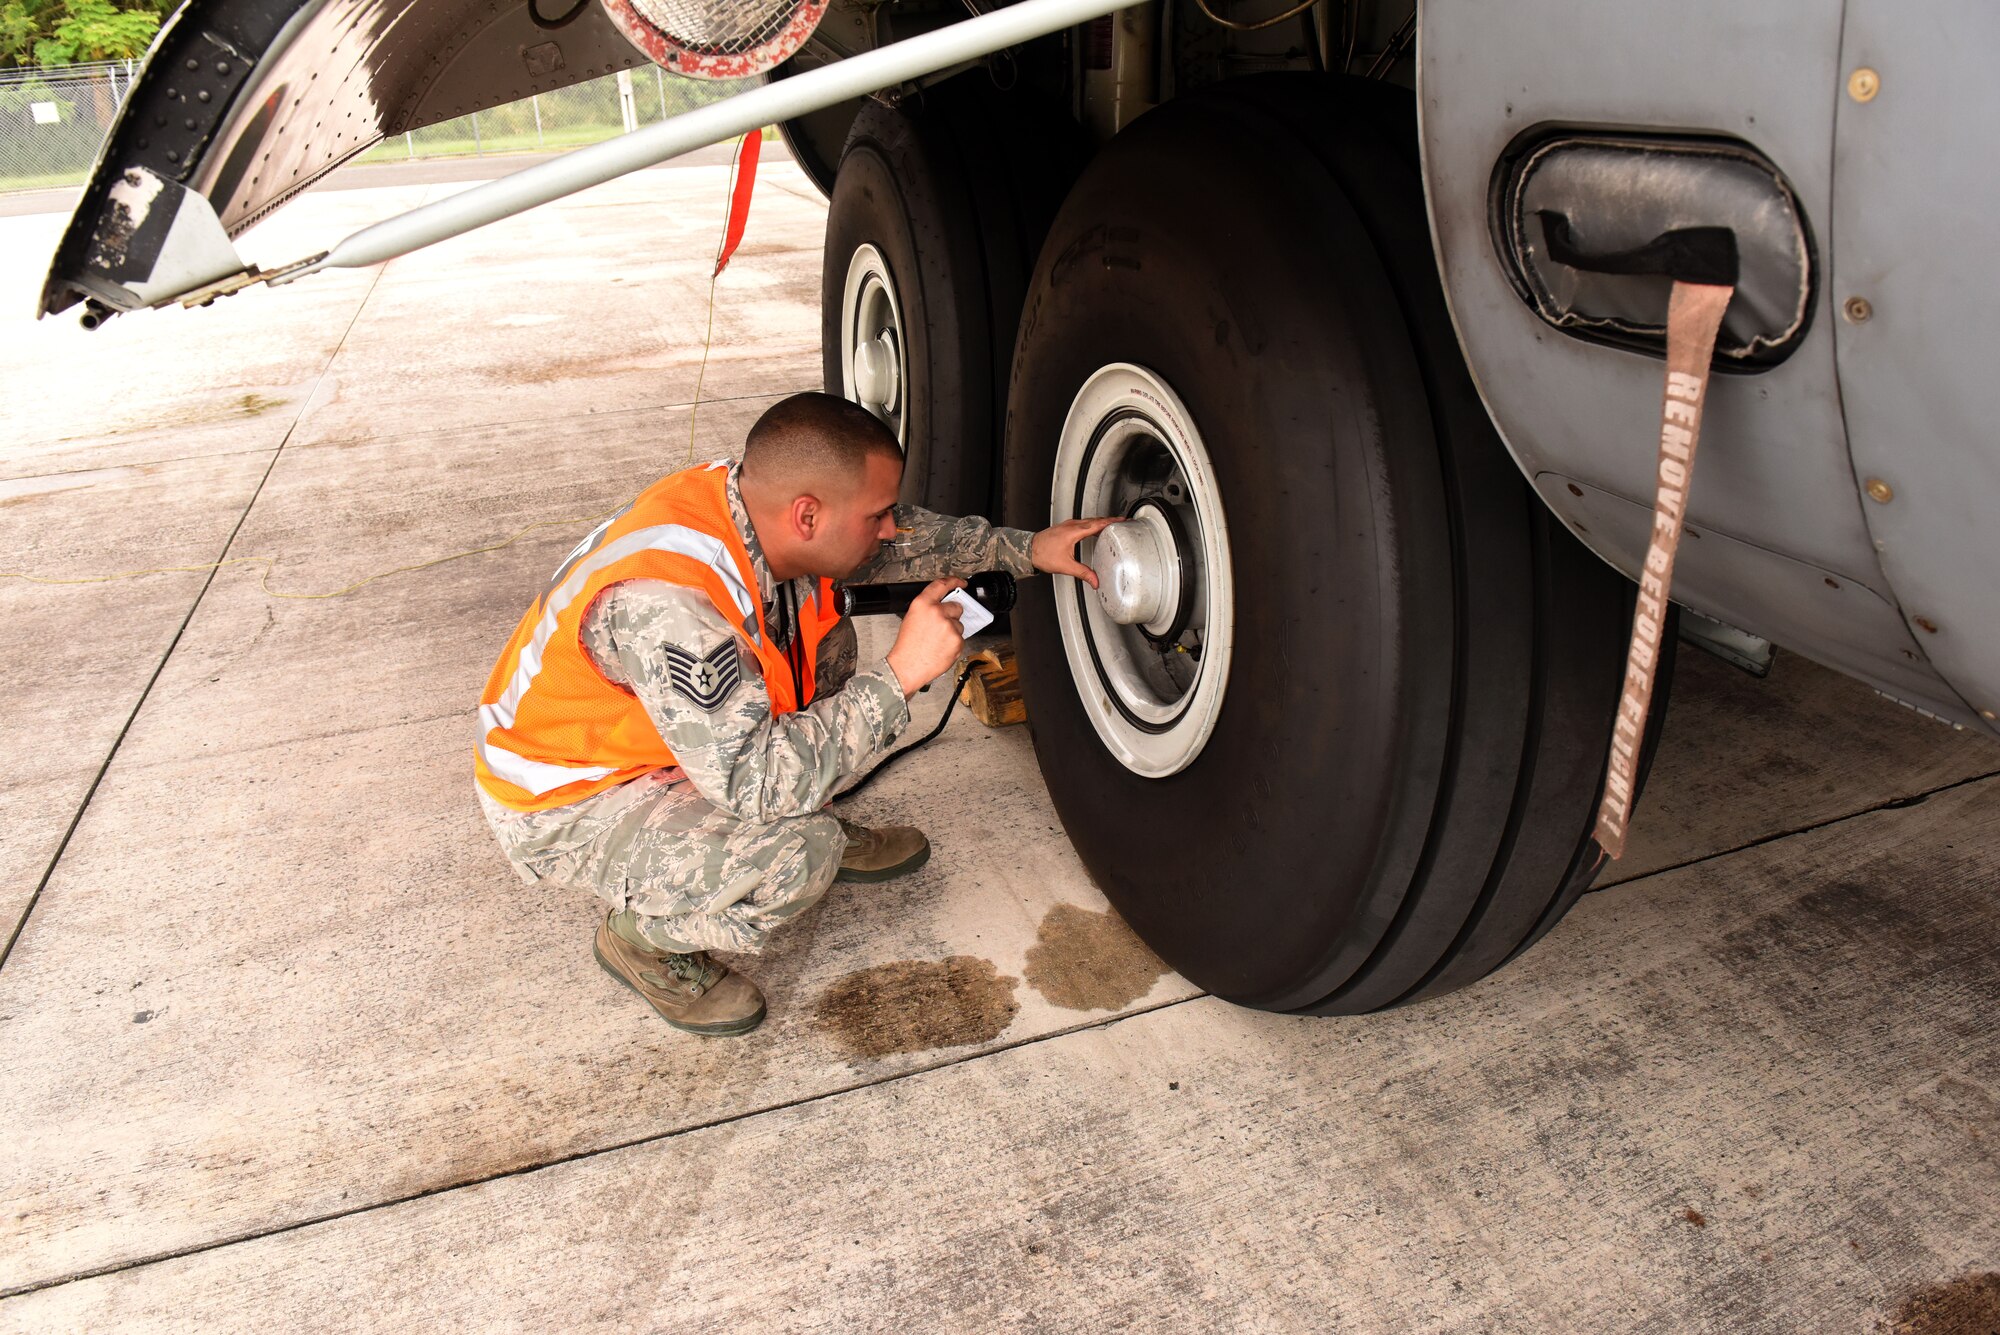 U.S. Air Force Staff Sgt. Hector Alamo, 156th Wing Inspection Team members, completes a maintenance inspections on a Puerto Rico Air National Guard WC-130 Hercules aircraft during an Air Mobility Command Inspector General visit on Muñiz Air National Guard Base, Carolina, Puerto Rico, April 30.  Members of the AMC IG team completed a mid-point review visit to evaluate the 156th WIT inspection process. (U.S. Air National Guard photo by Tech. Sgt. Efraín Sánchez)